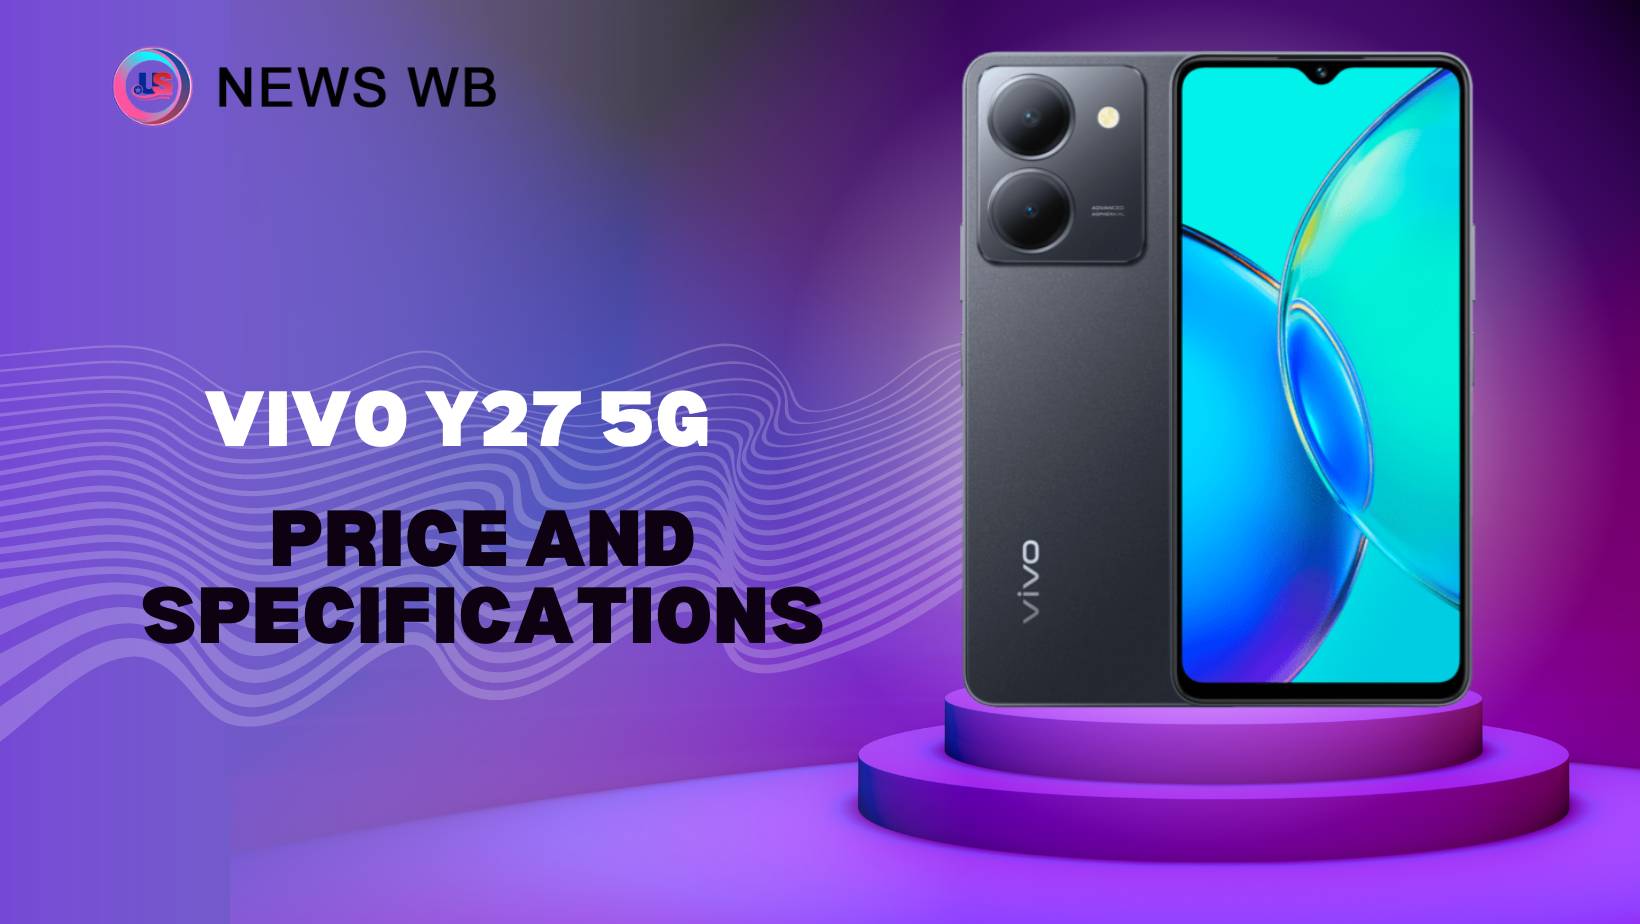 Vivo Y27 5G Price and Specifications